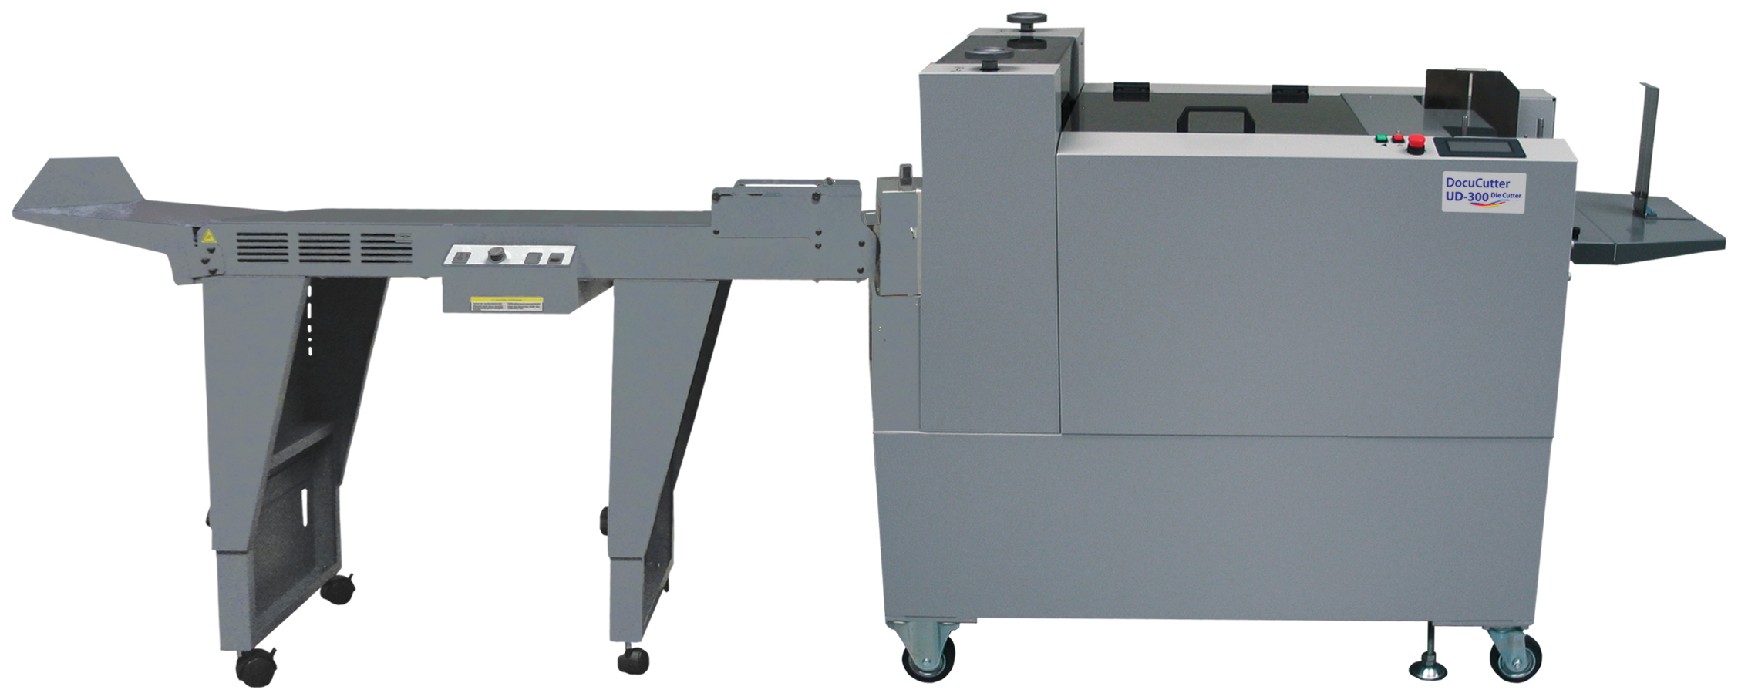 What are the advantages of a rotary die-cutter machine